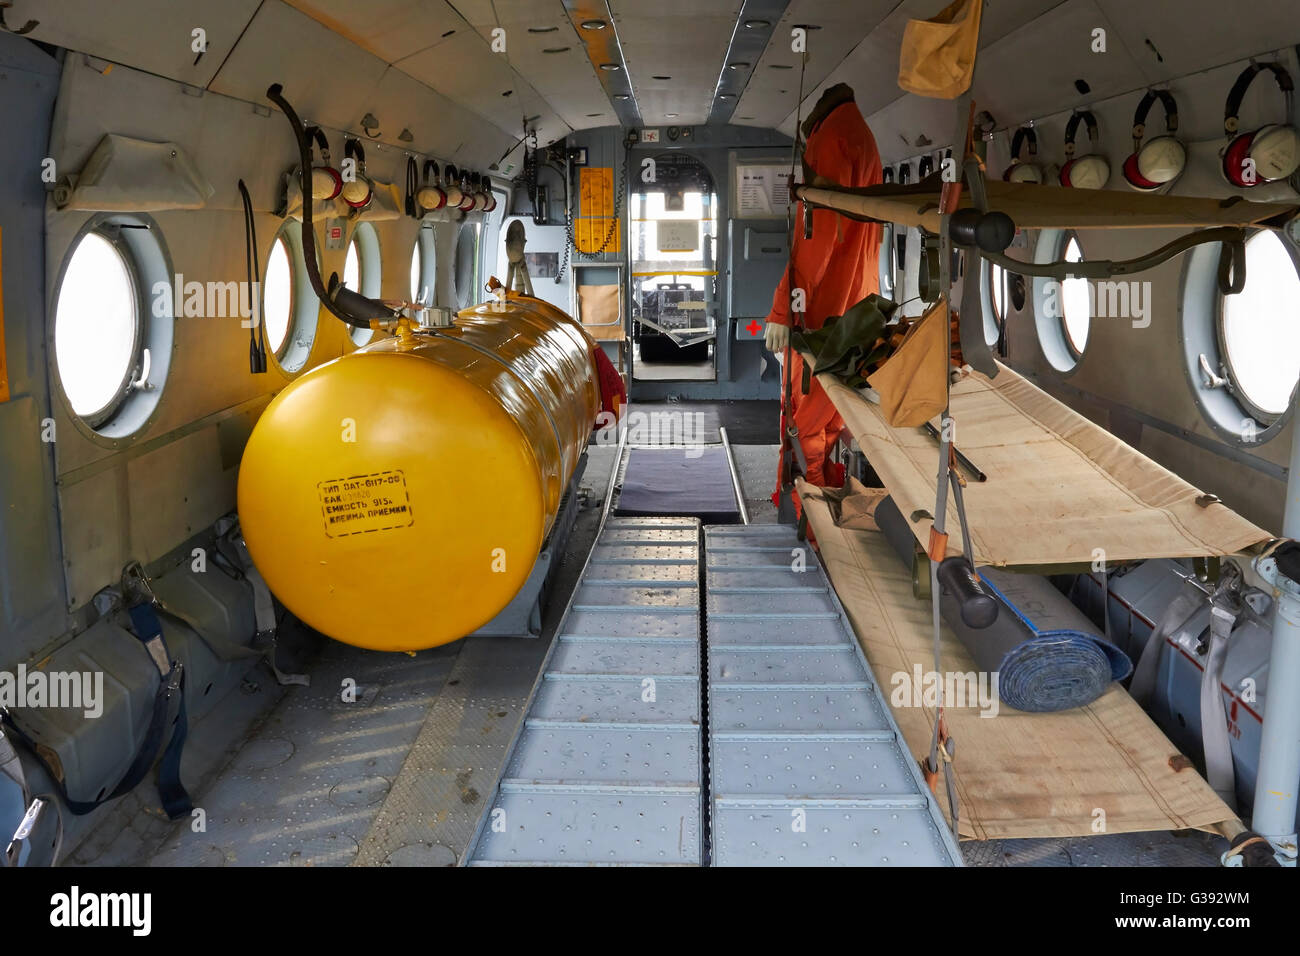 Mil Mi-8T helicopter interior, Finland Stock Photo